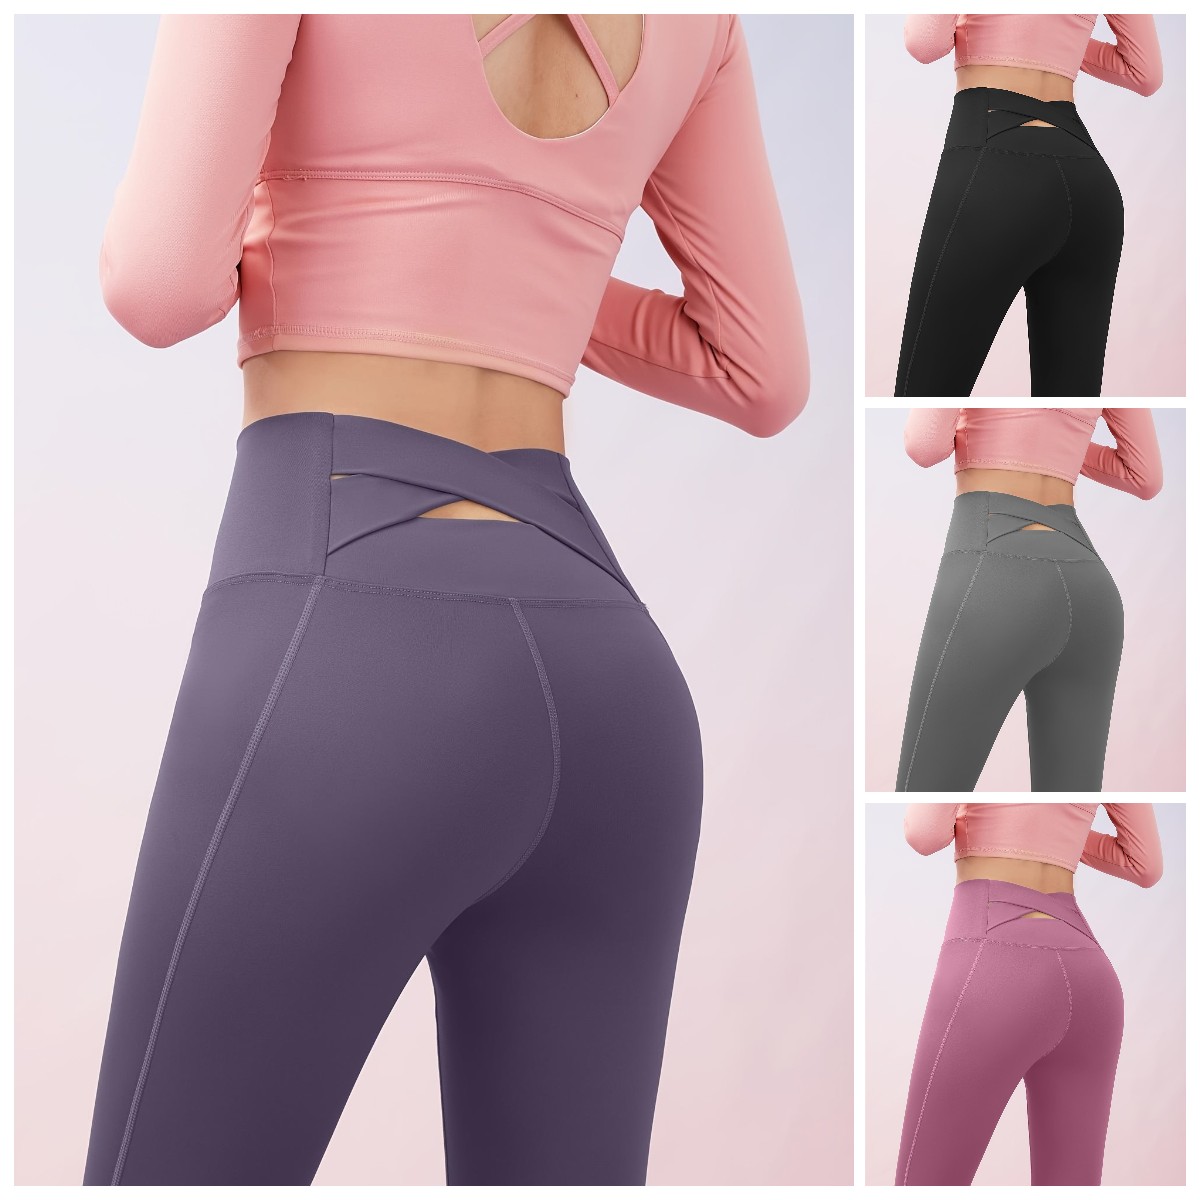 Women's Yoga Pants Tummy Control Butt Lift High Waist Yoga Fitness Gym  Workout Leggings Bottoms White Sports Activewear High Elasticity Skinny /  Athle